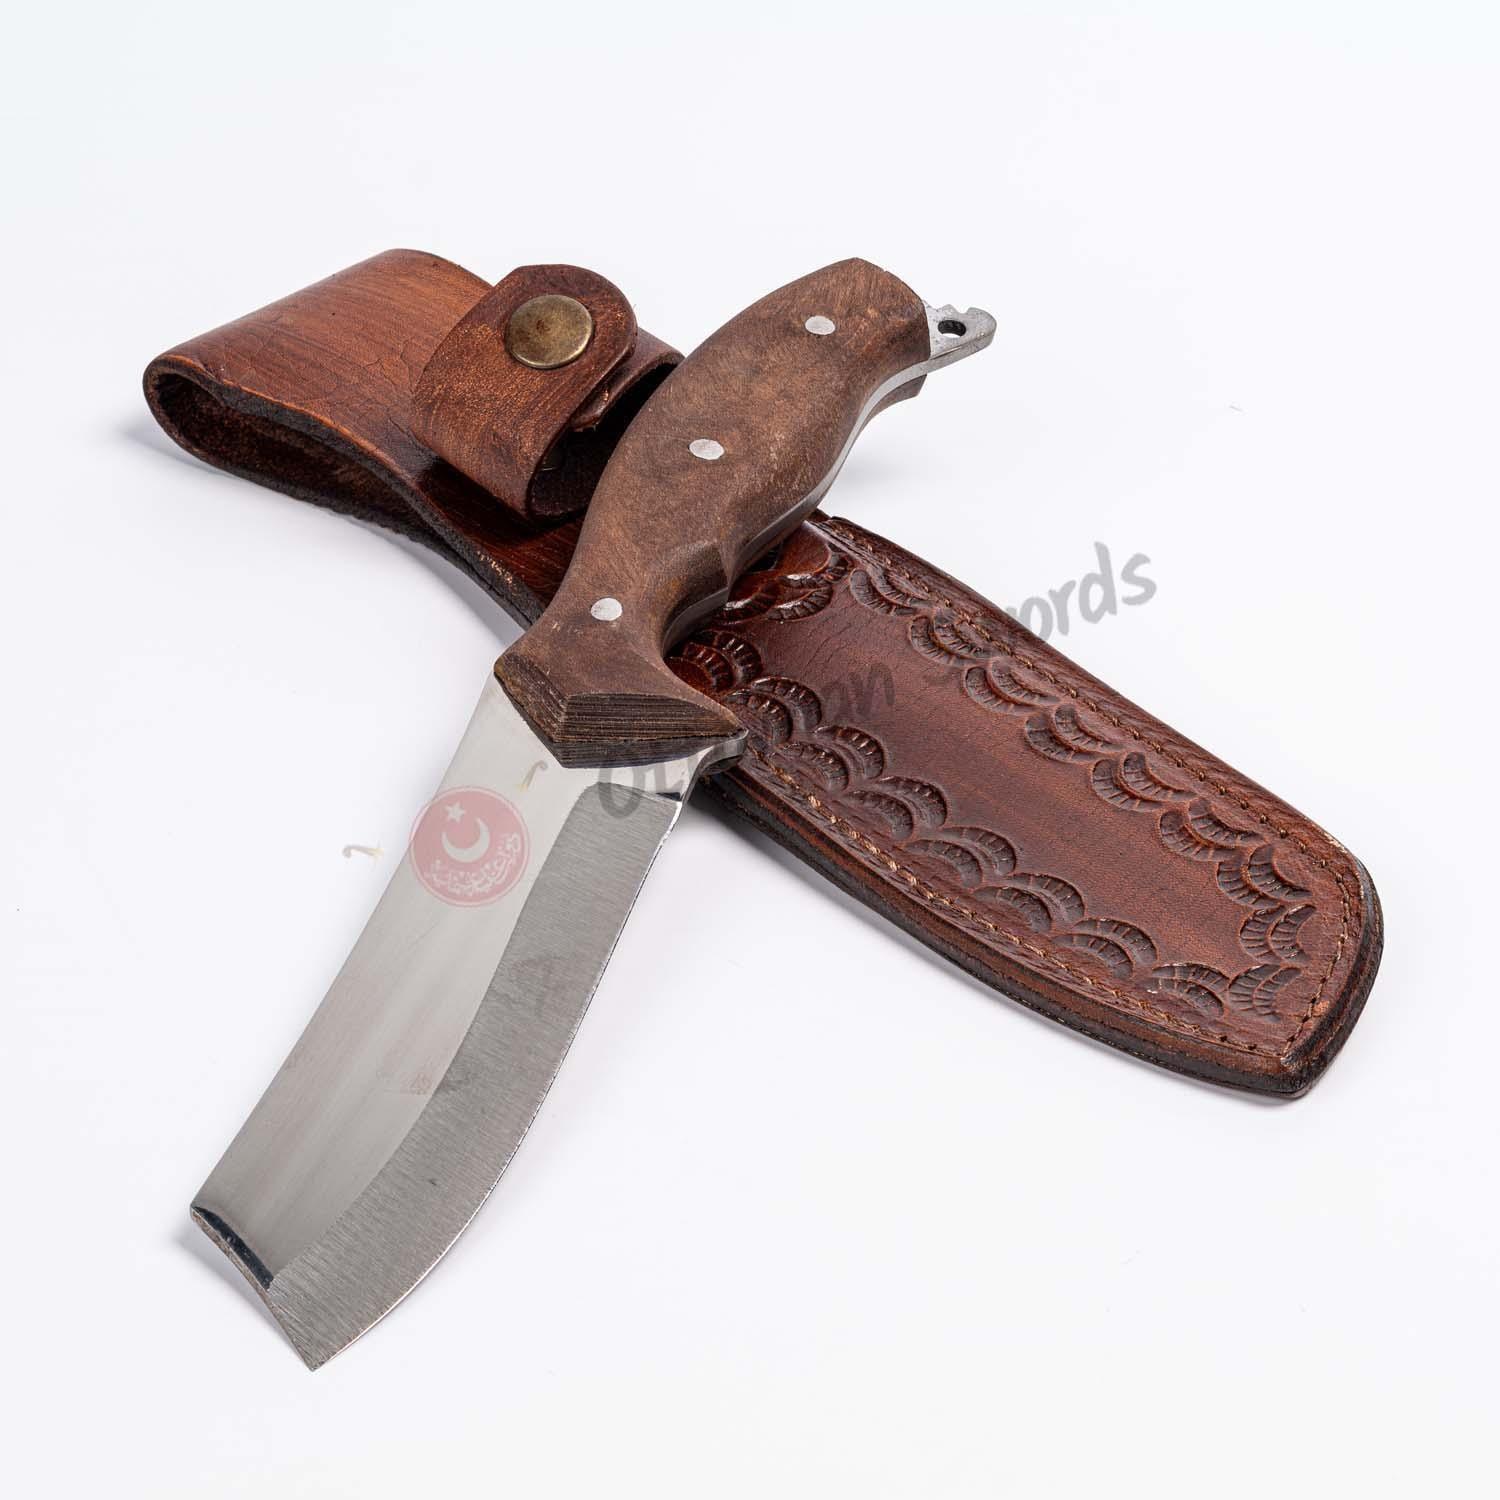 Handcrafted Japanese Style Tanto Knife Walnut Handle (1)